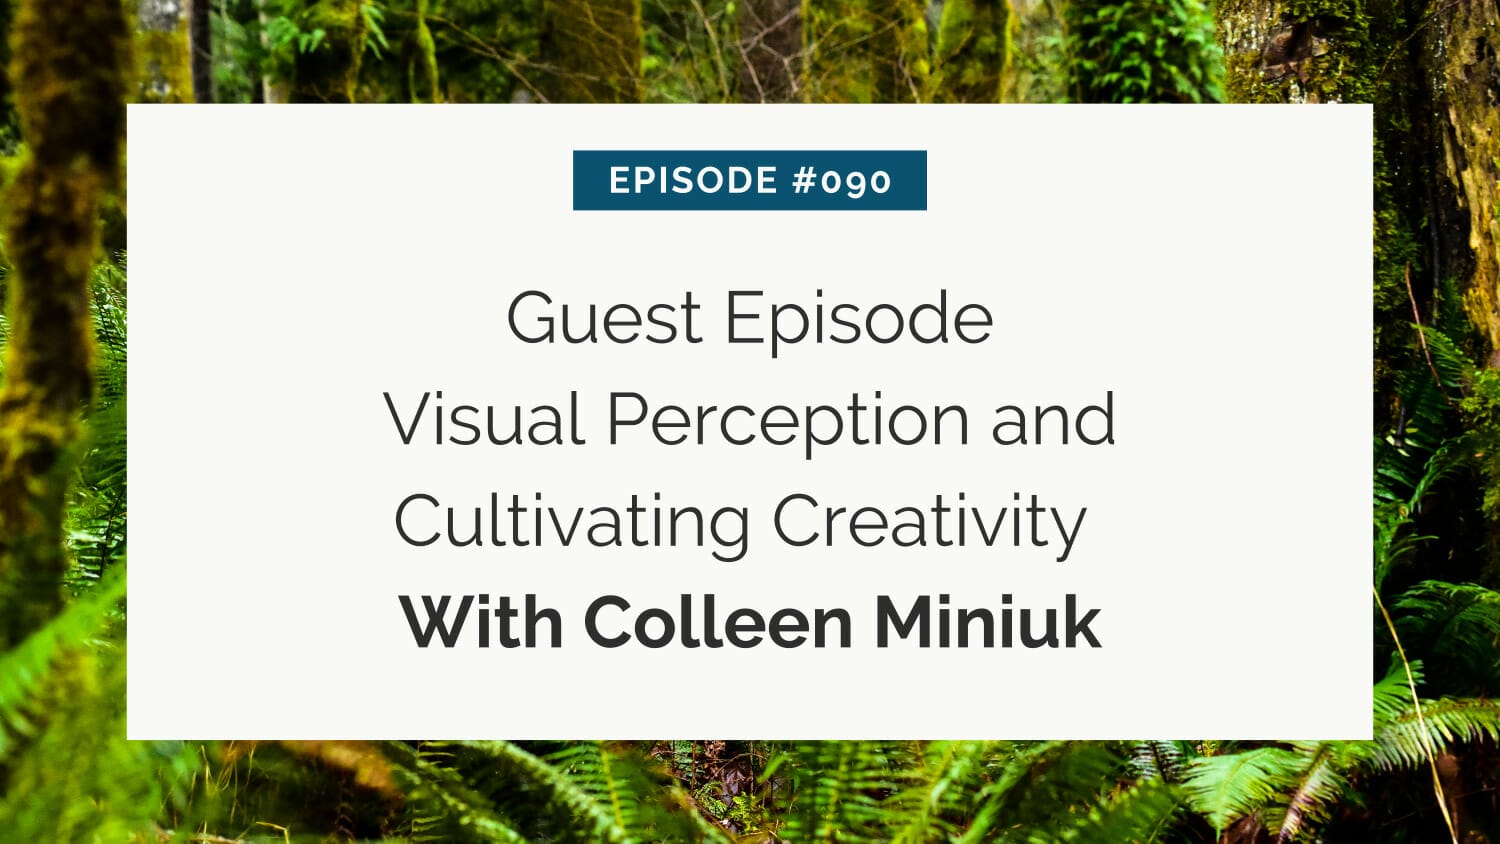 Promotional graphic for podcast episode #090 on "visual perception and cultivating creativity" with guest colleen miniuk.